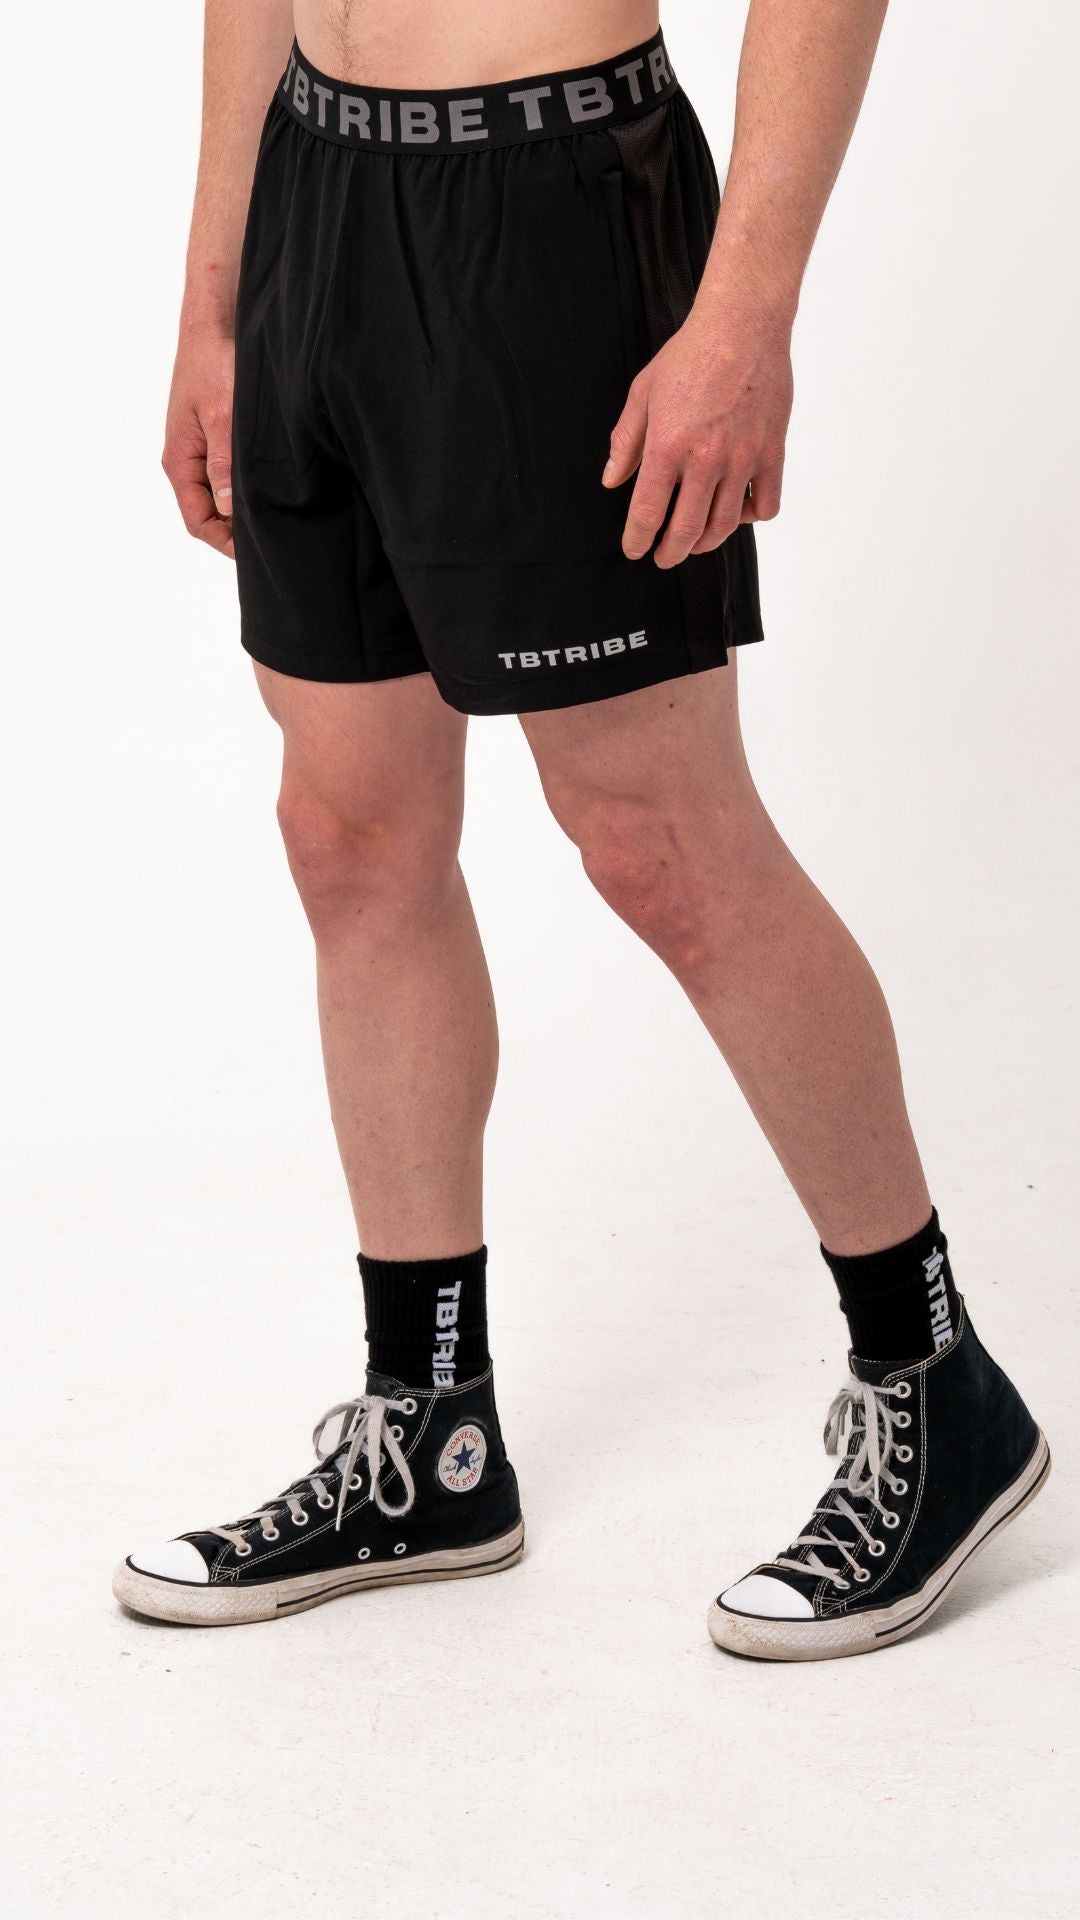 Black gym, training shorts with branded TB Tribe elastic waist band. Features side pockets with zippers, mesh panels on the side for ventilation and small TB Tribe logo on left leg